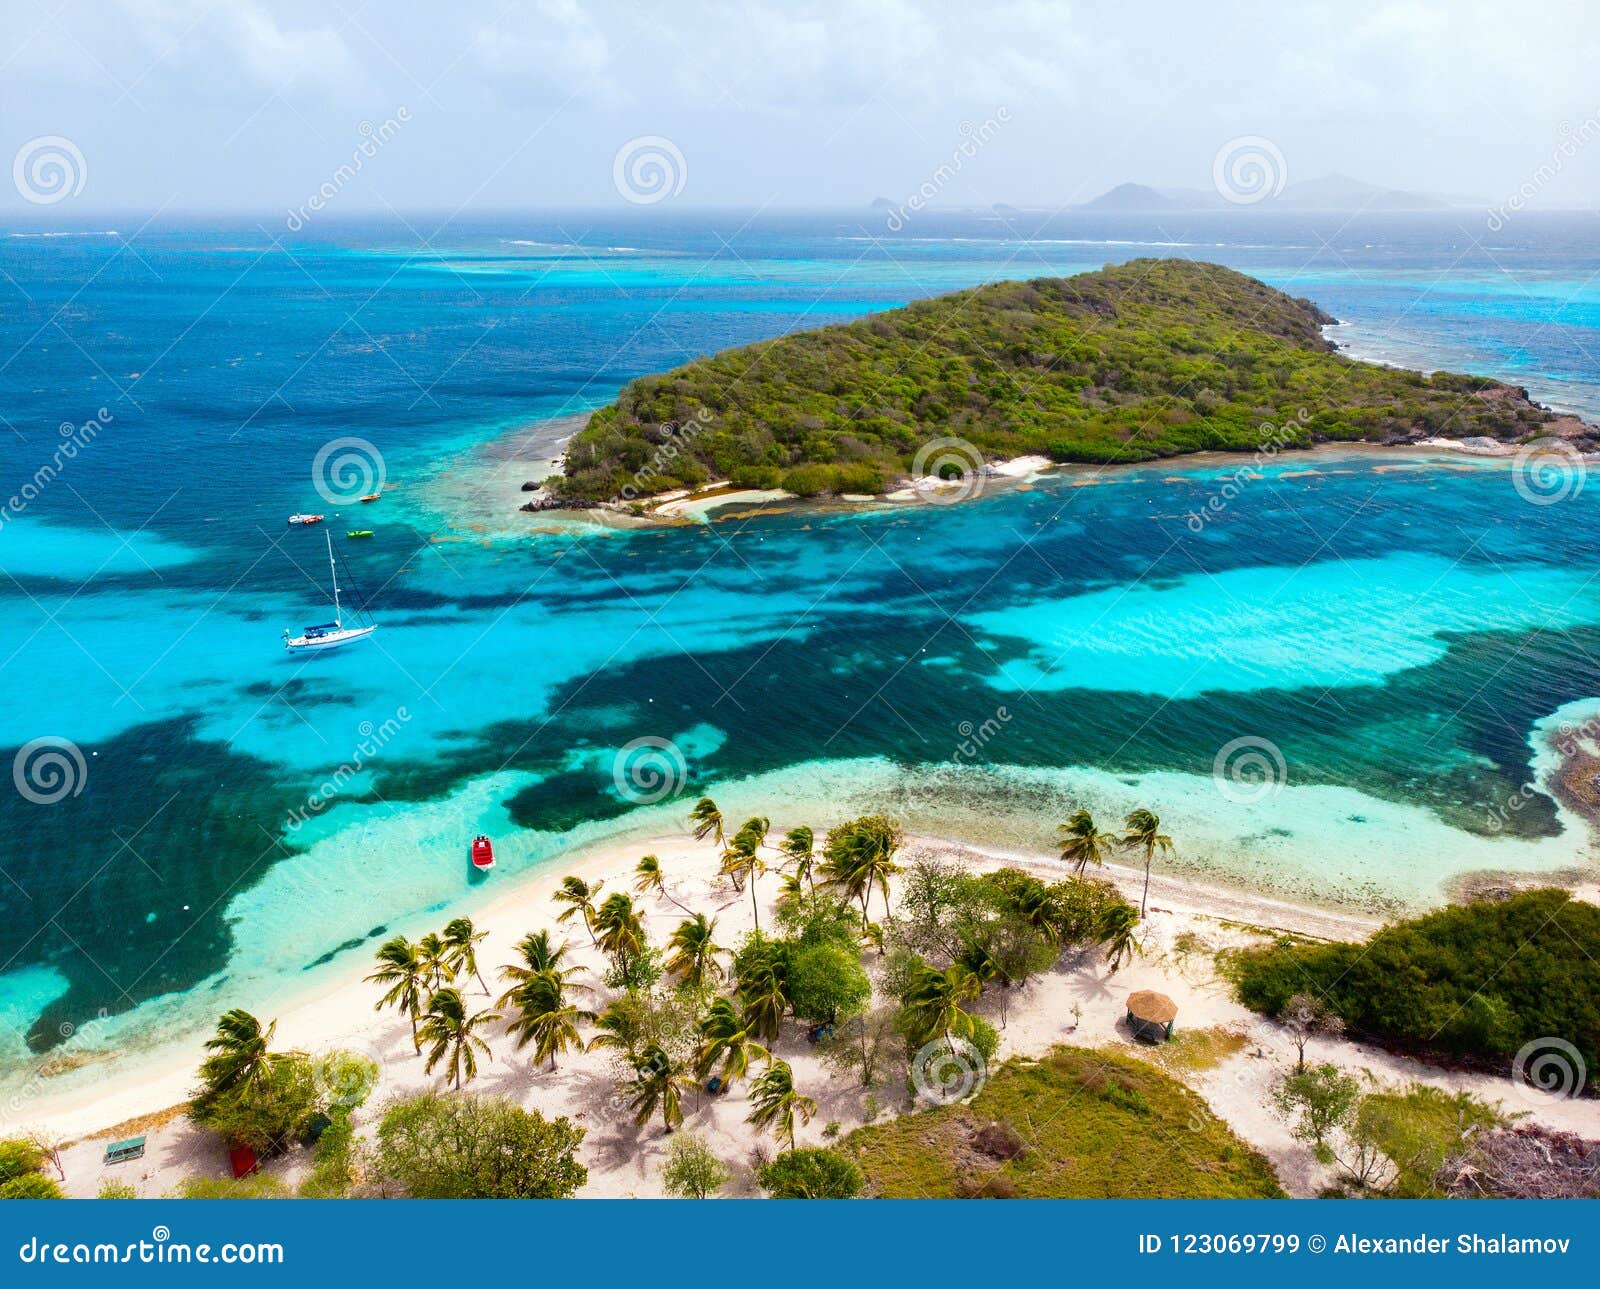 top view of tobago cays